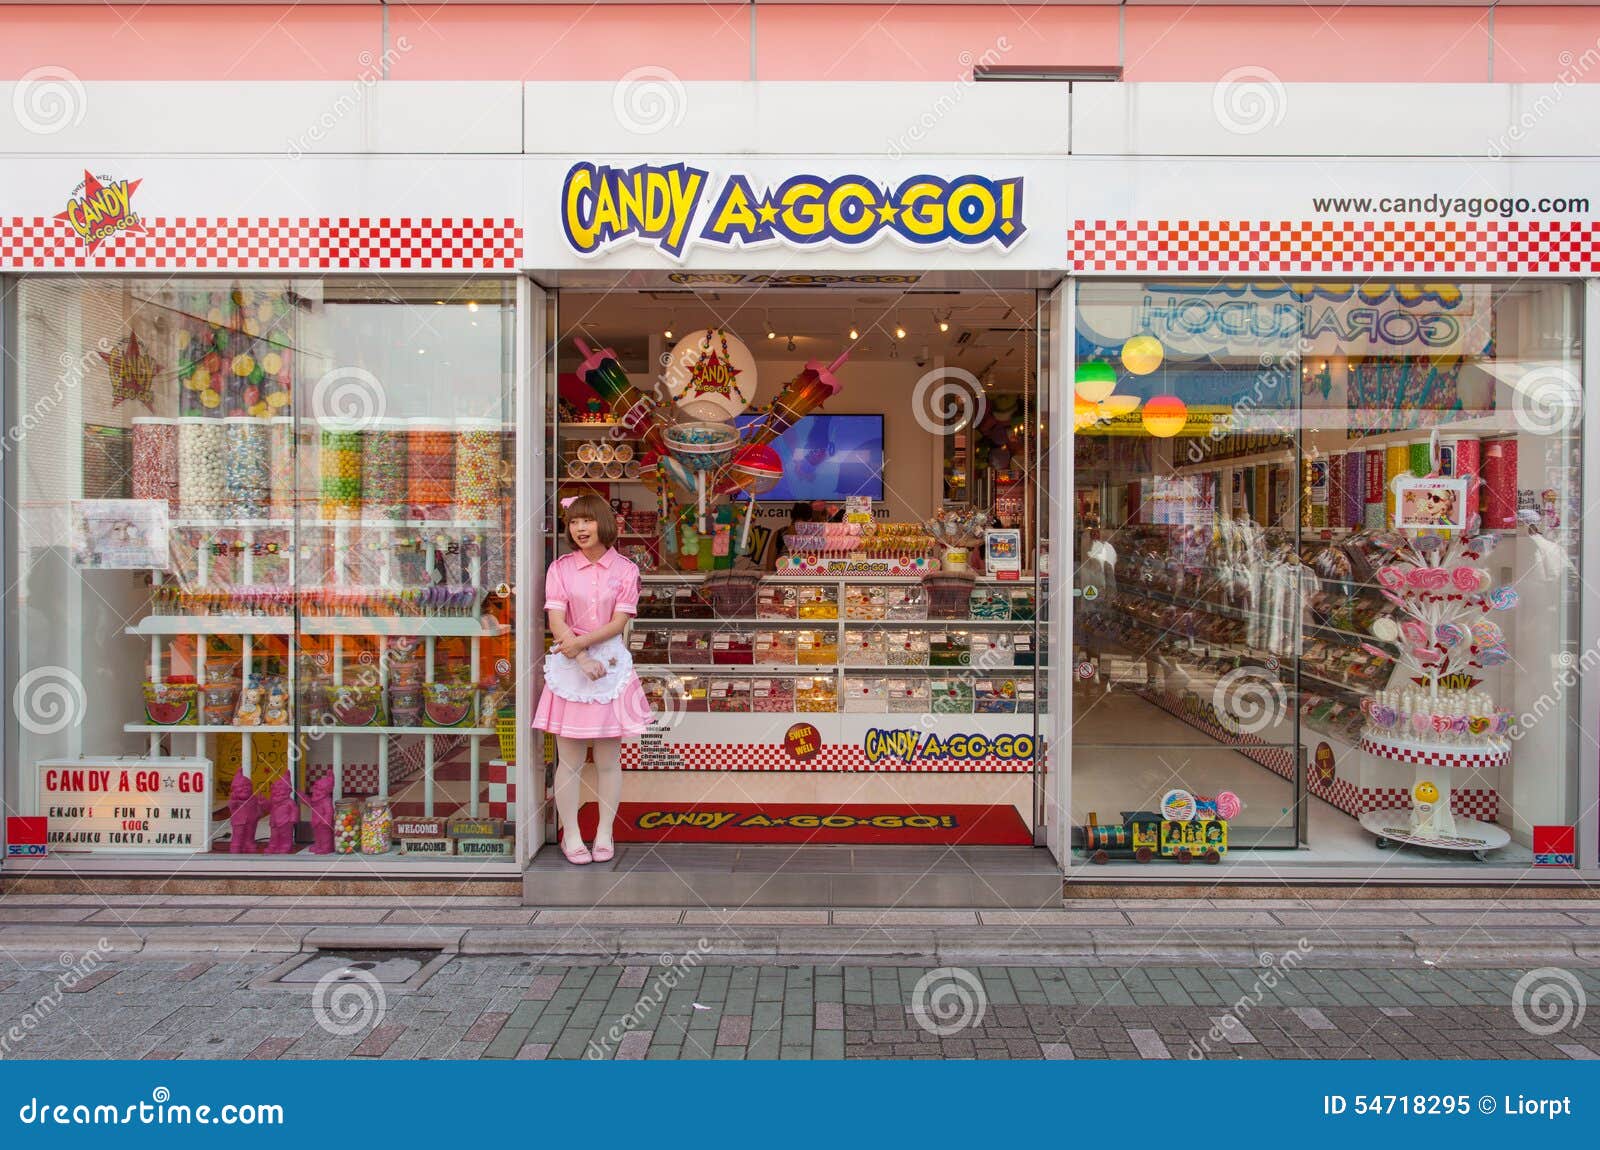 Tokyo Candy A Go Go Candy Shop And Vendor Editorial Image Image Of Takeshita Pink